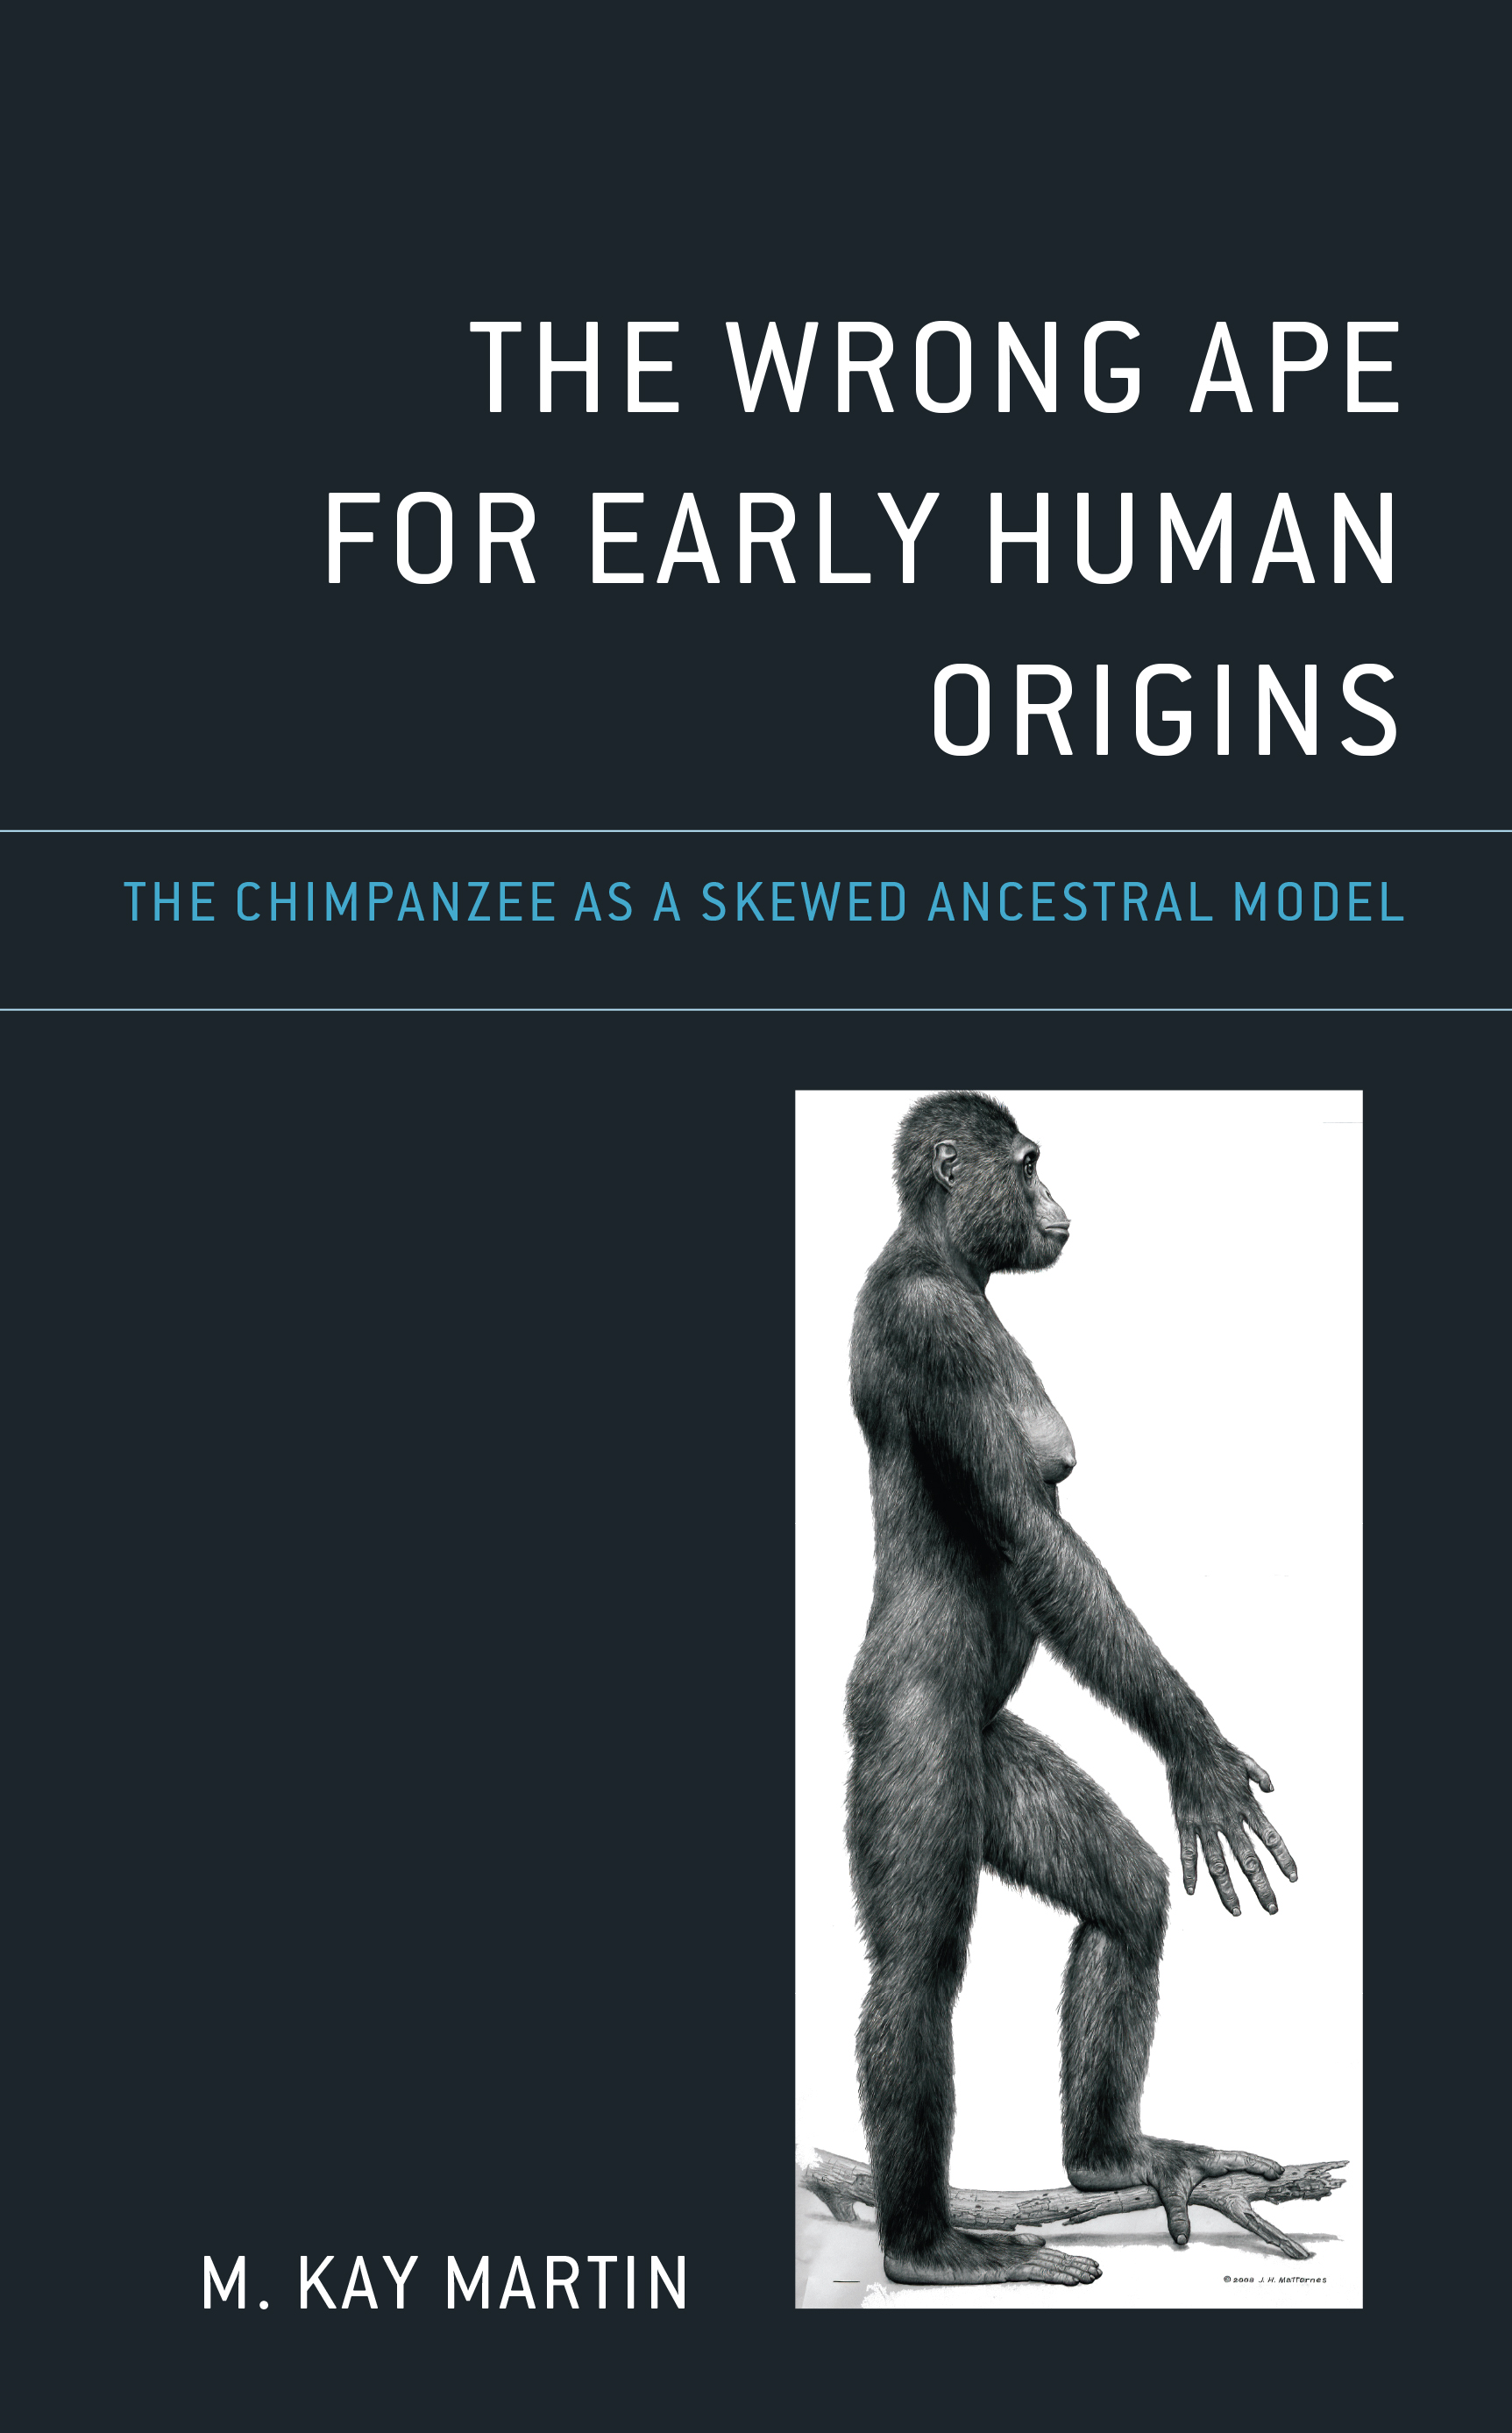 The Wrong Ape for Early Human Origins: The Chimpanzee as a Skewed Ancestral Model